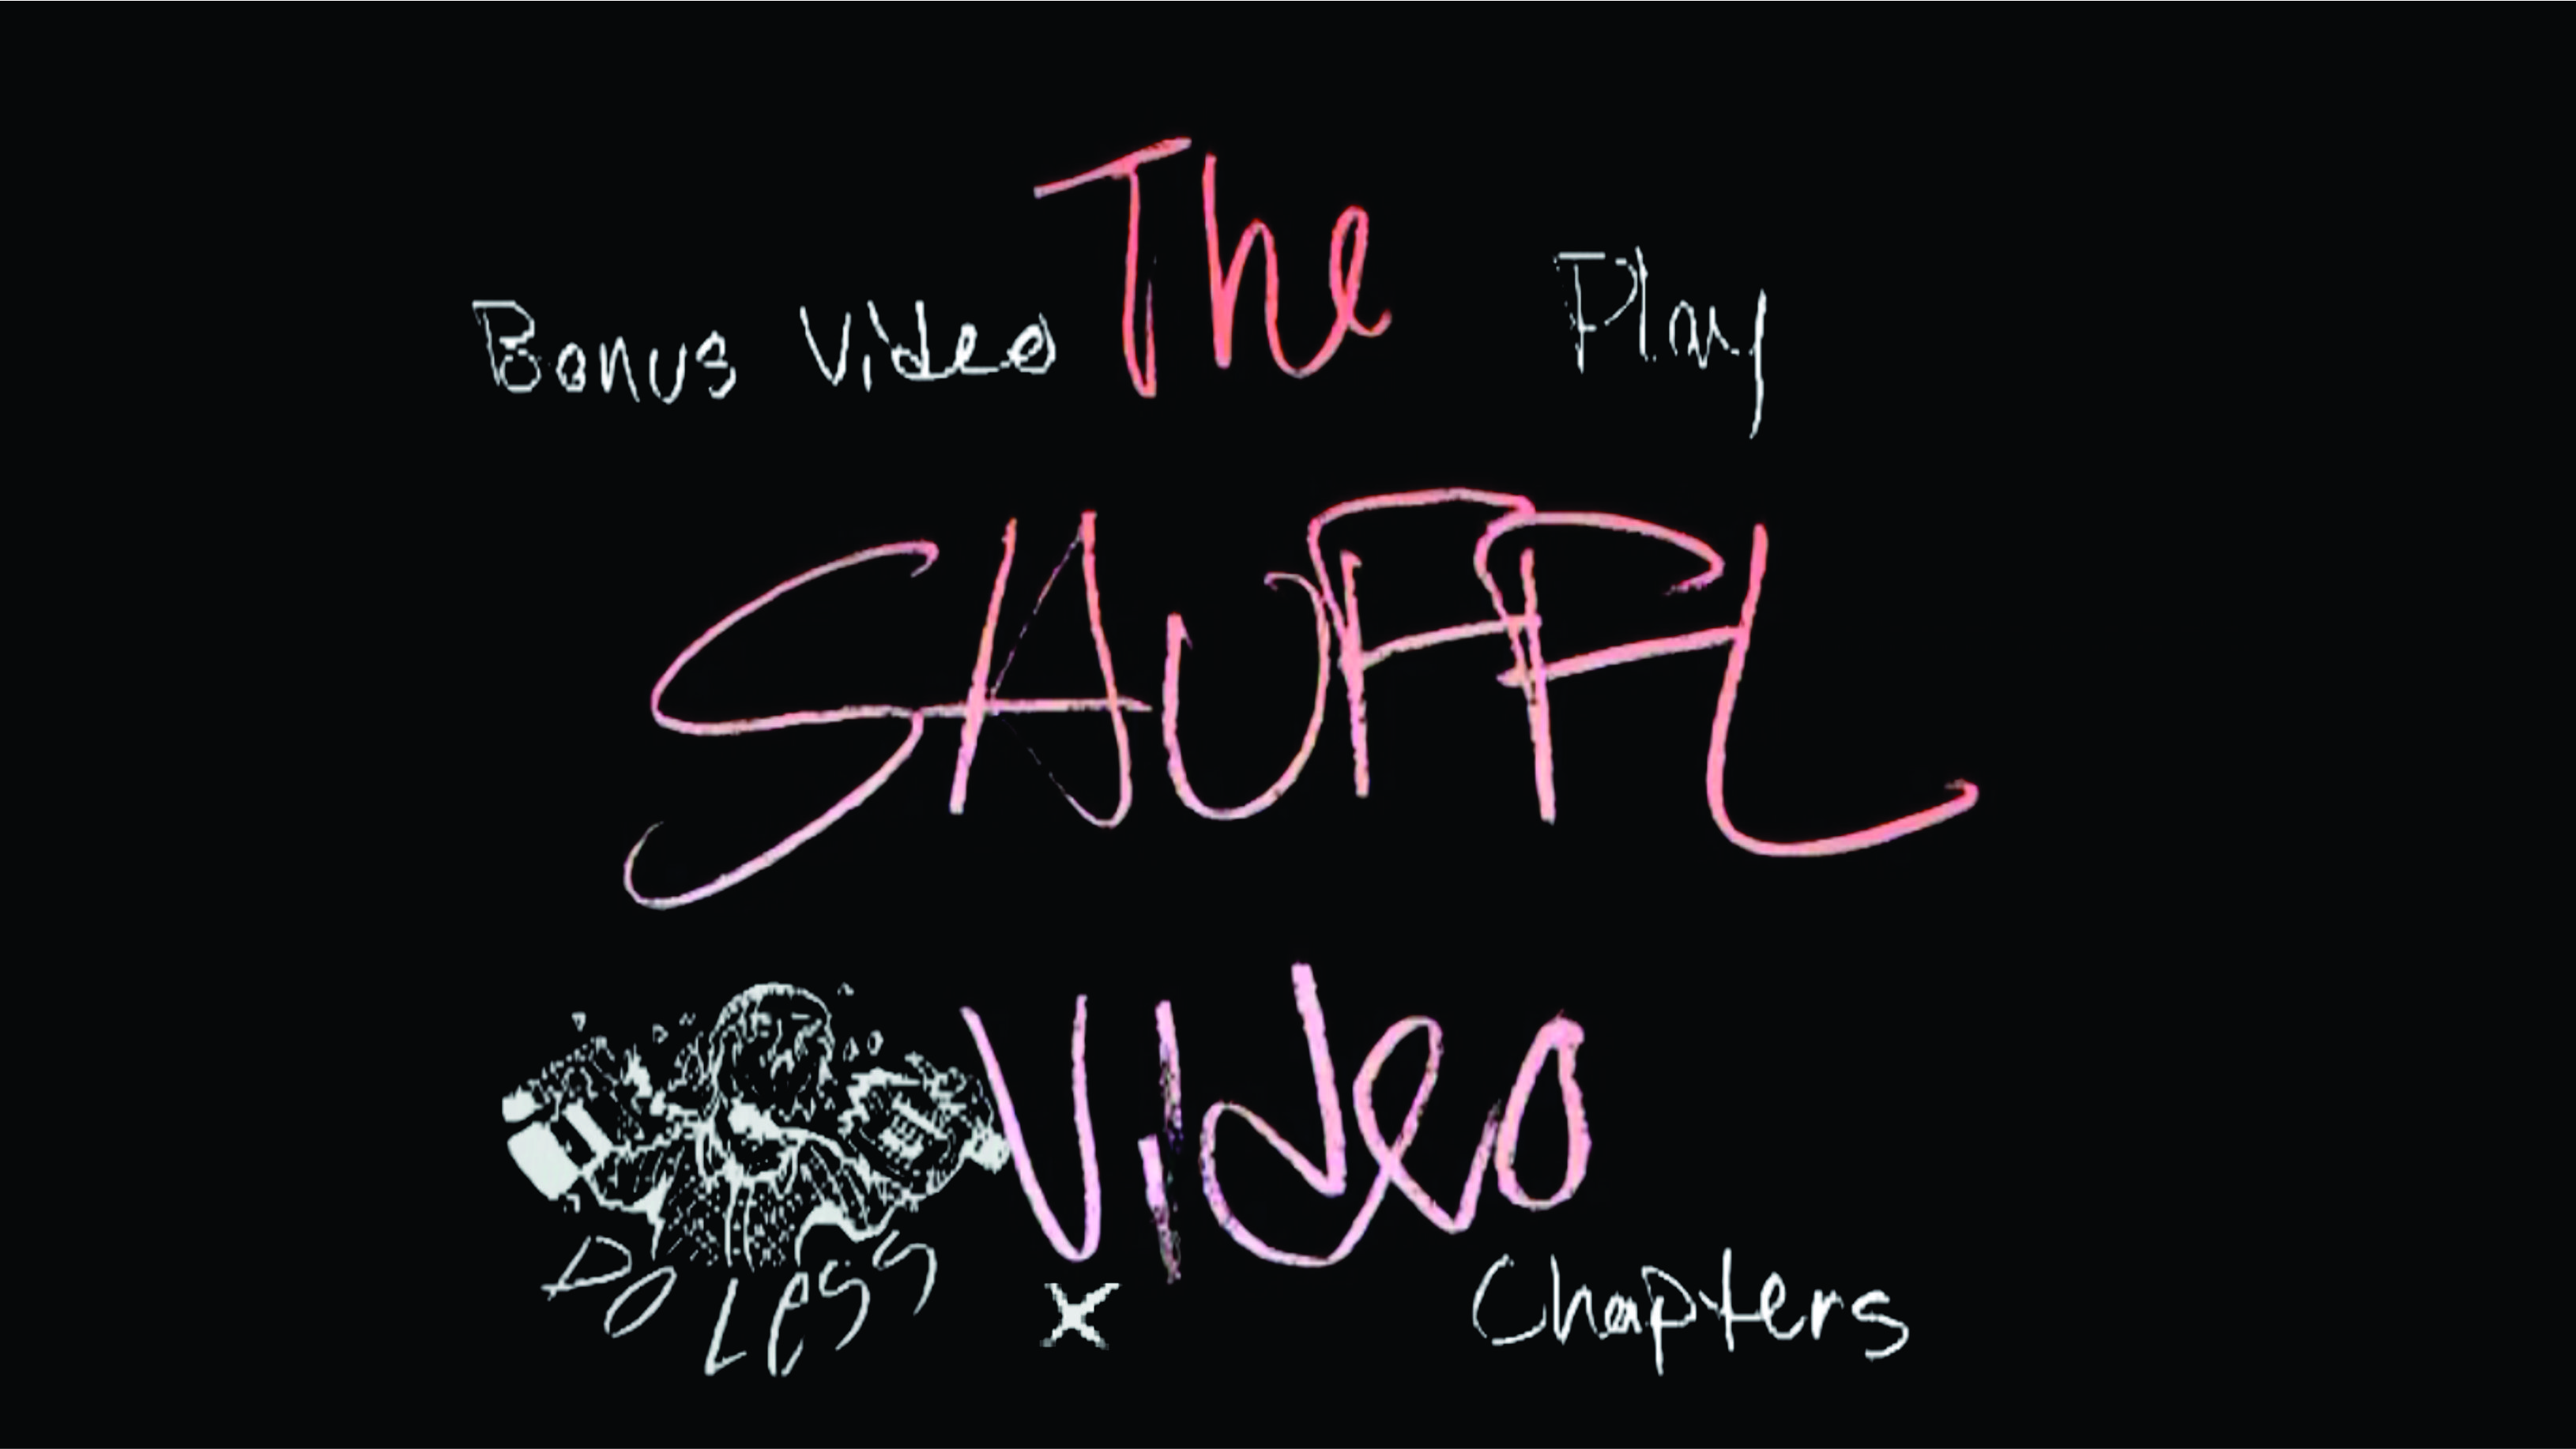 The Shuffl Video cover